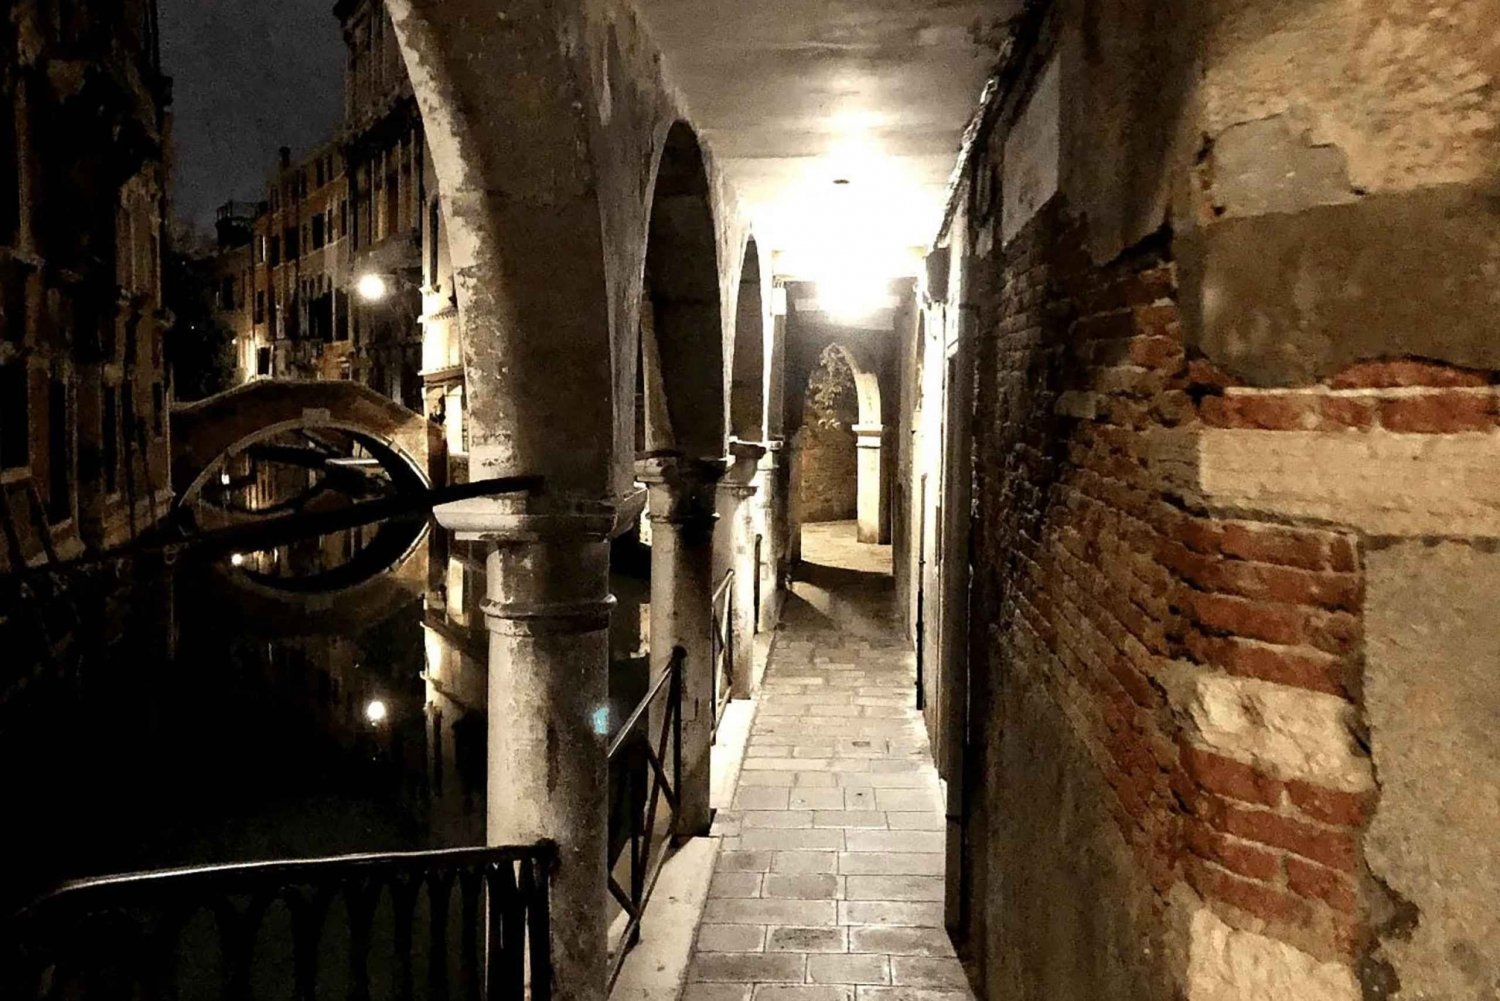 Venice After Dark: A Spine-Chilling Ghost Tour